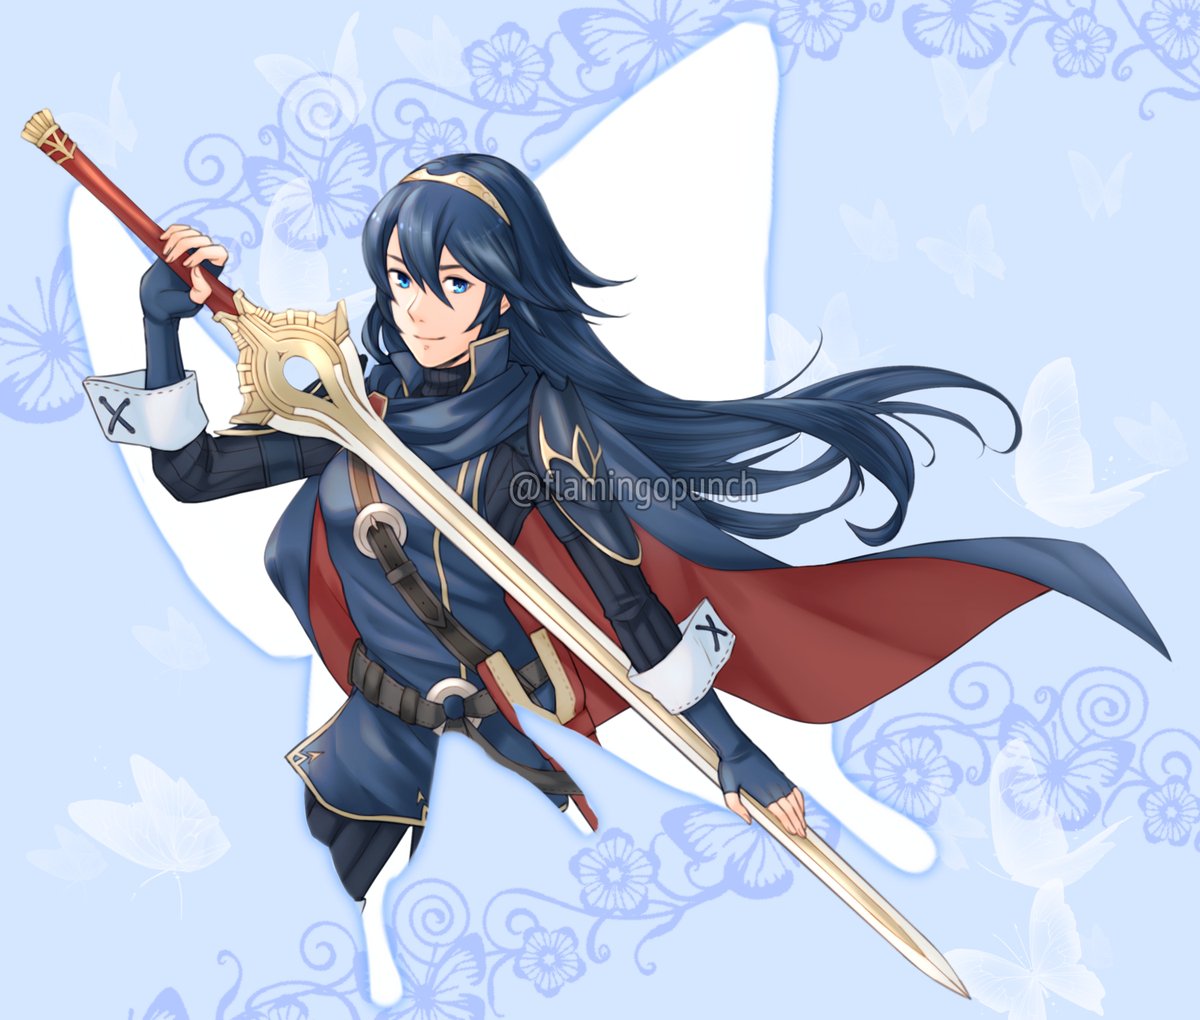 RT @flamingopunch: sharing one of my favorite Lucina Fire Emblem drawings once more https://t.co/vgdCXxsb9L